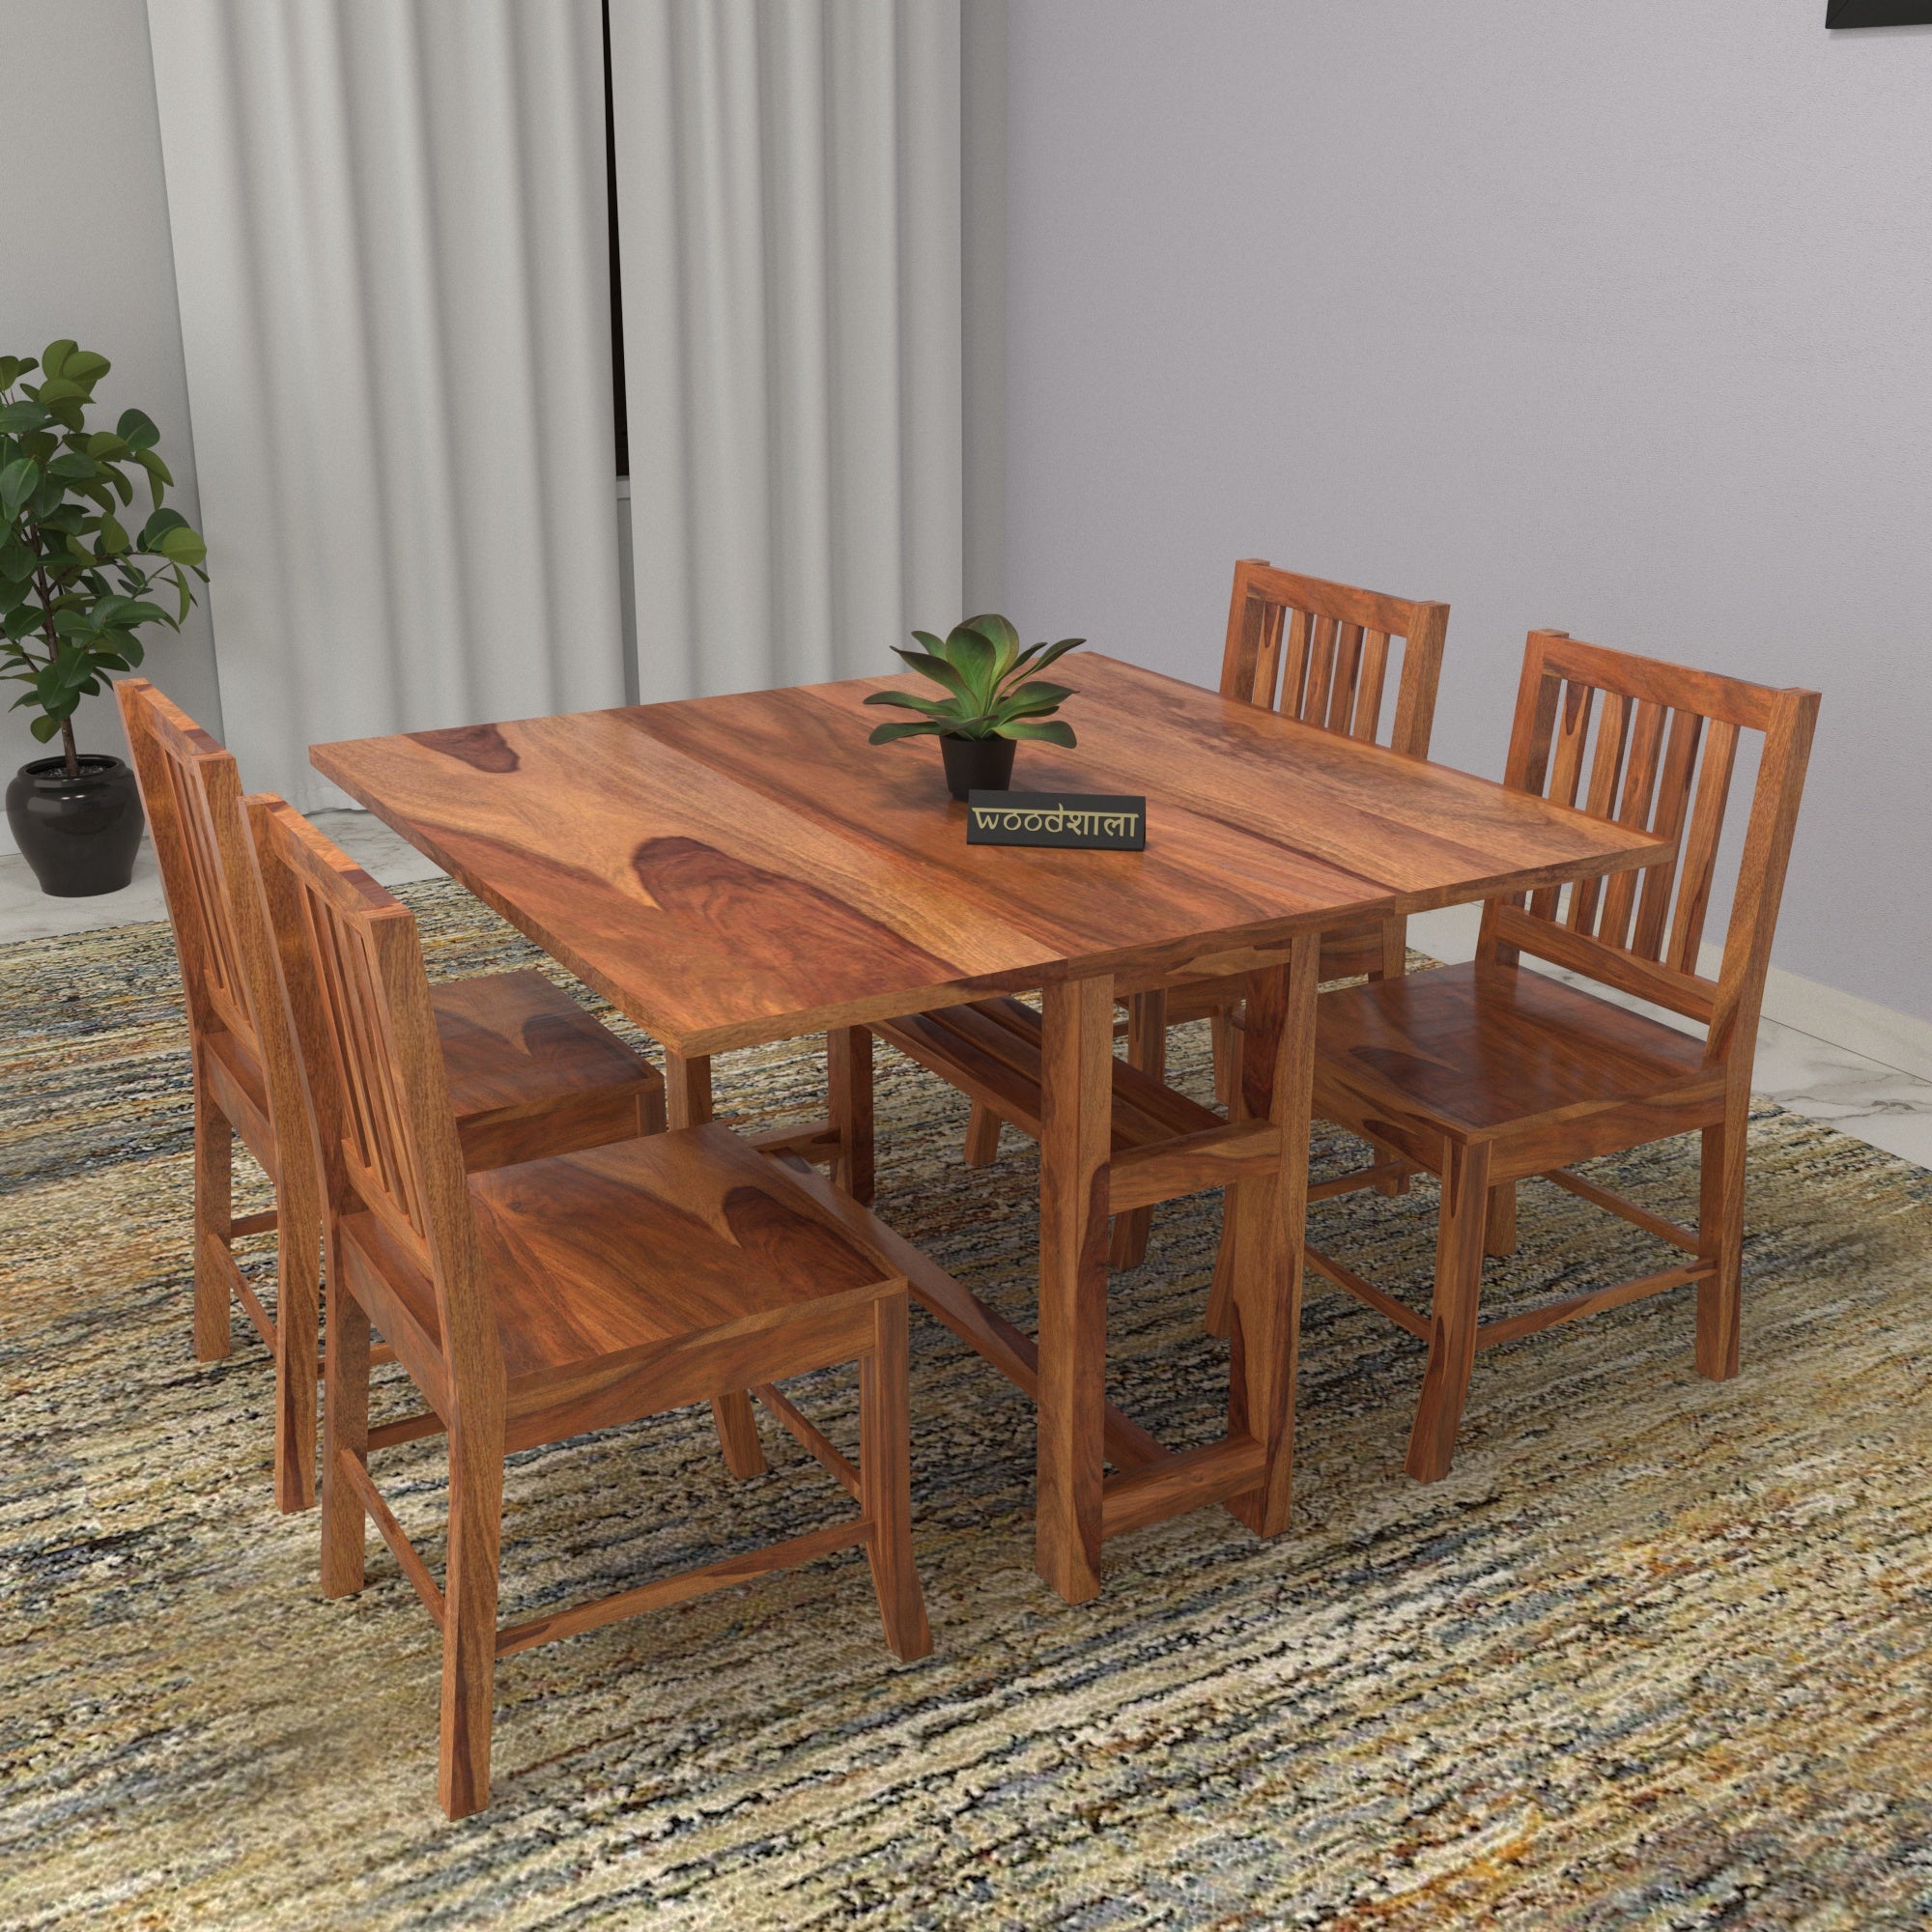 Southern Classic Light Finished Handmade Wooden Dining Set Dining Set